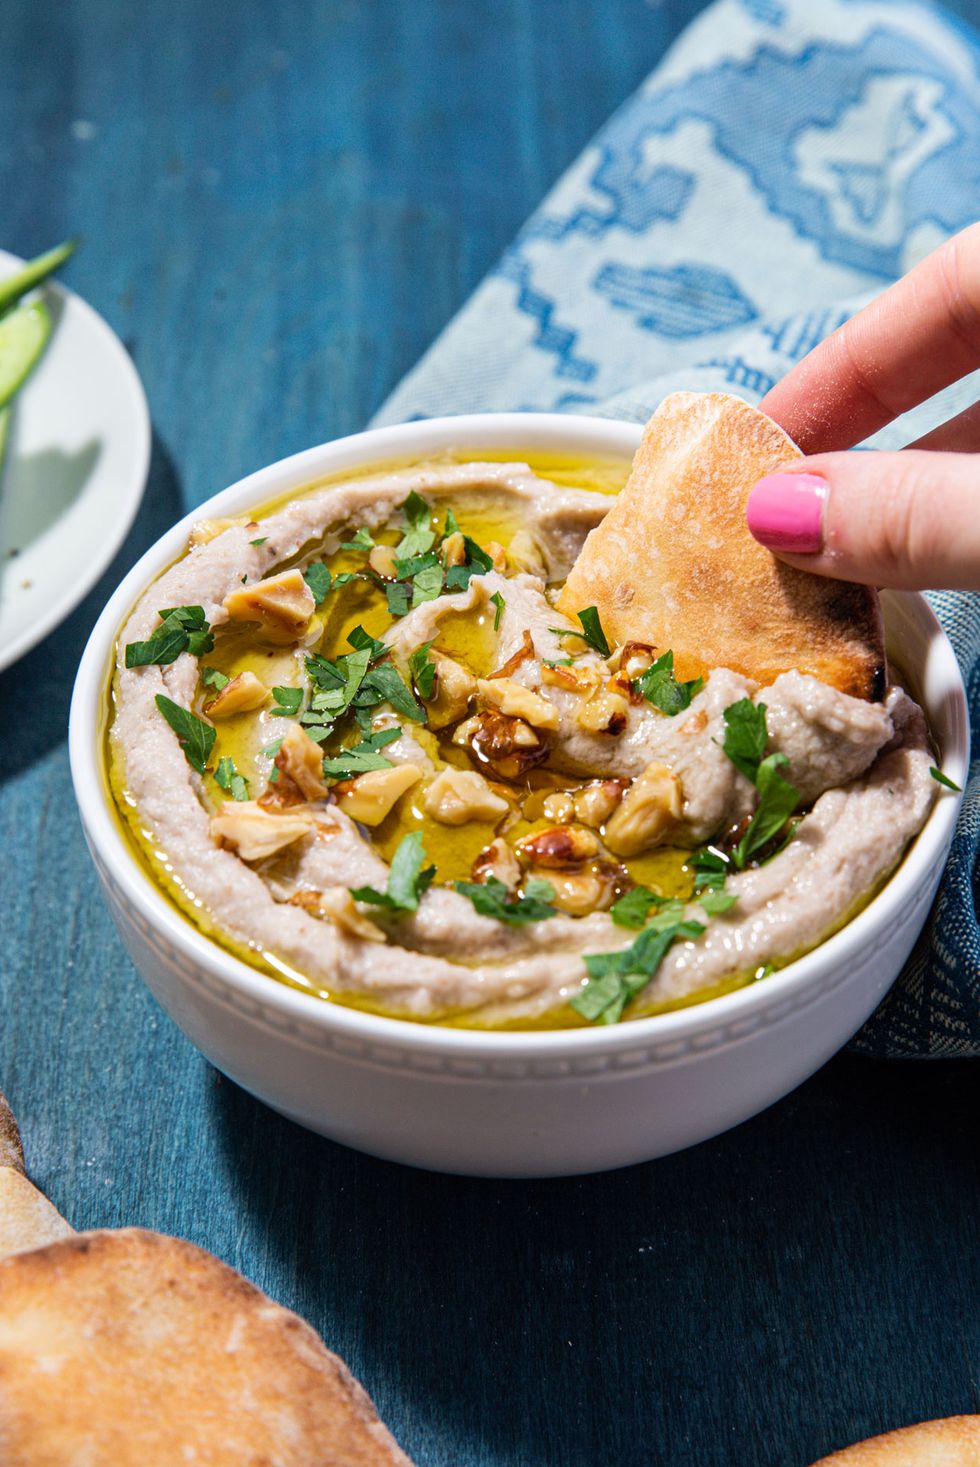 11 Healthier Dip Recipes for Your Next Party